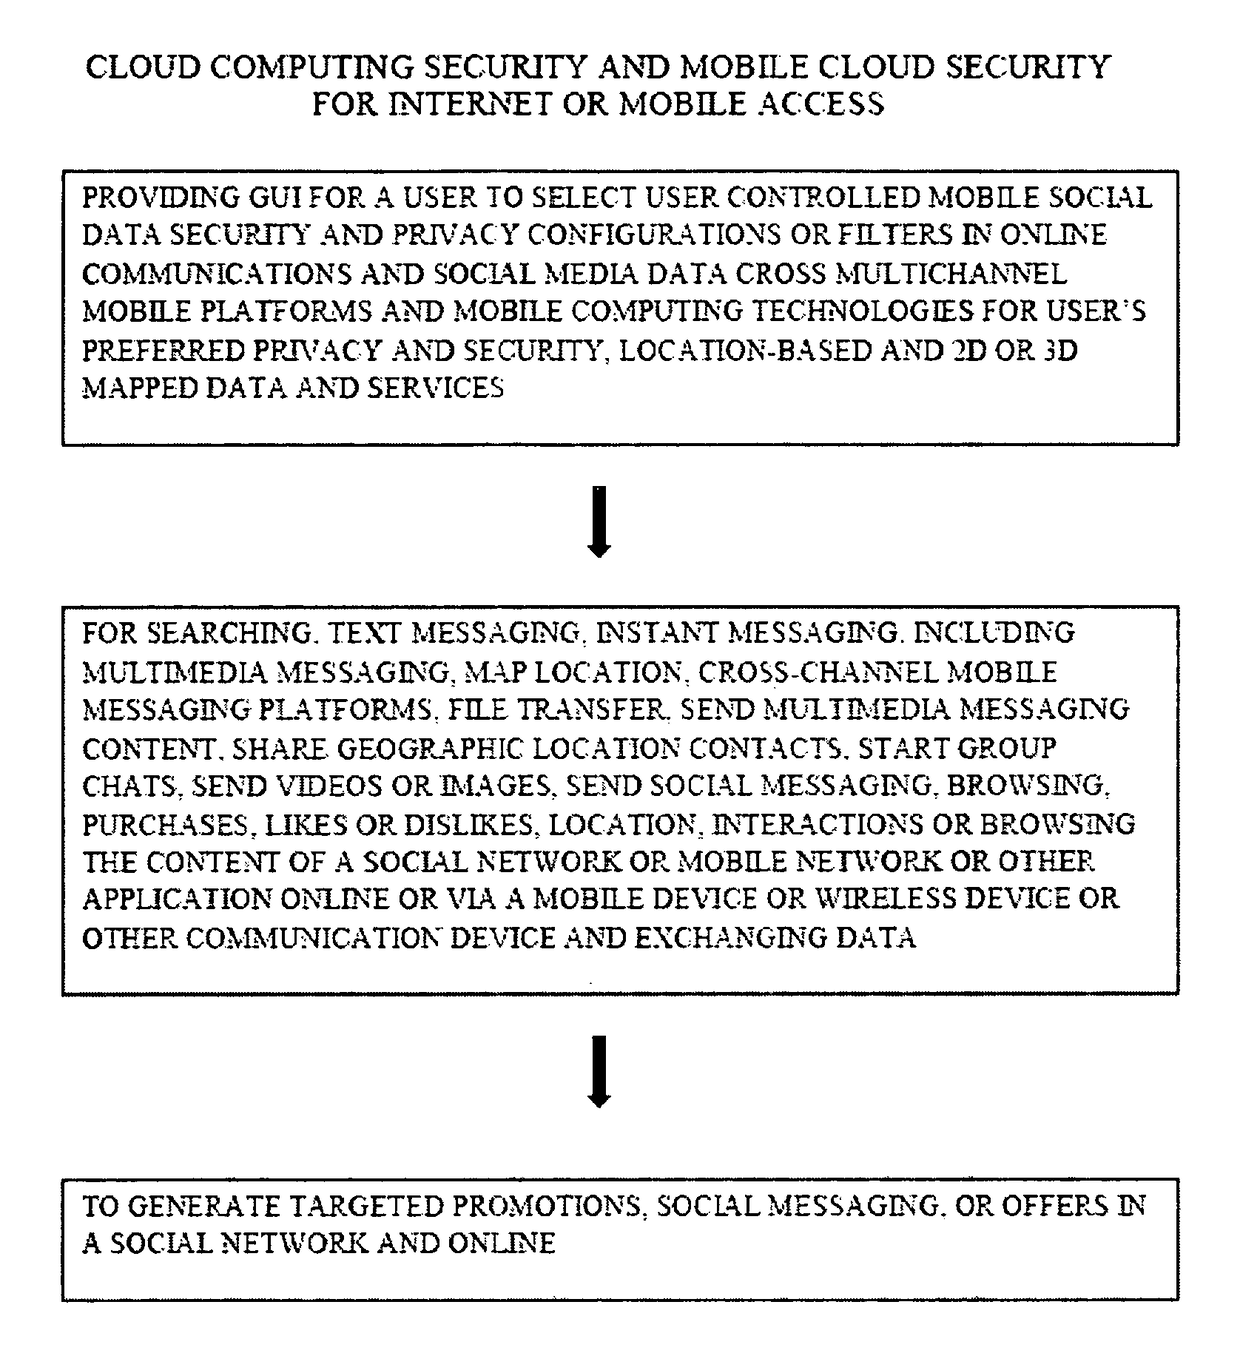 Methods and/or systems for an online and/or mobile privacy and/or security encryption technologies used in cloud computing with the combination of data mining and/or encryption of user's personal data and/or location data for marketing of internet posted promotions, social messaging or offers using multiple devices, browsers, operating systems, networks, fiber optic communications, multichannel platforms